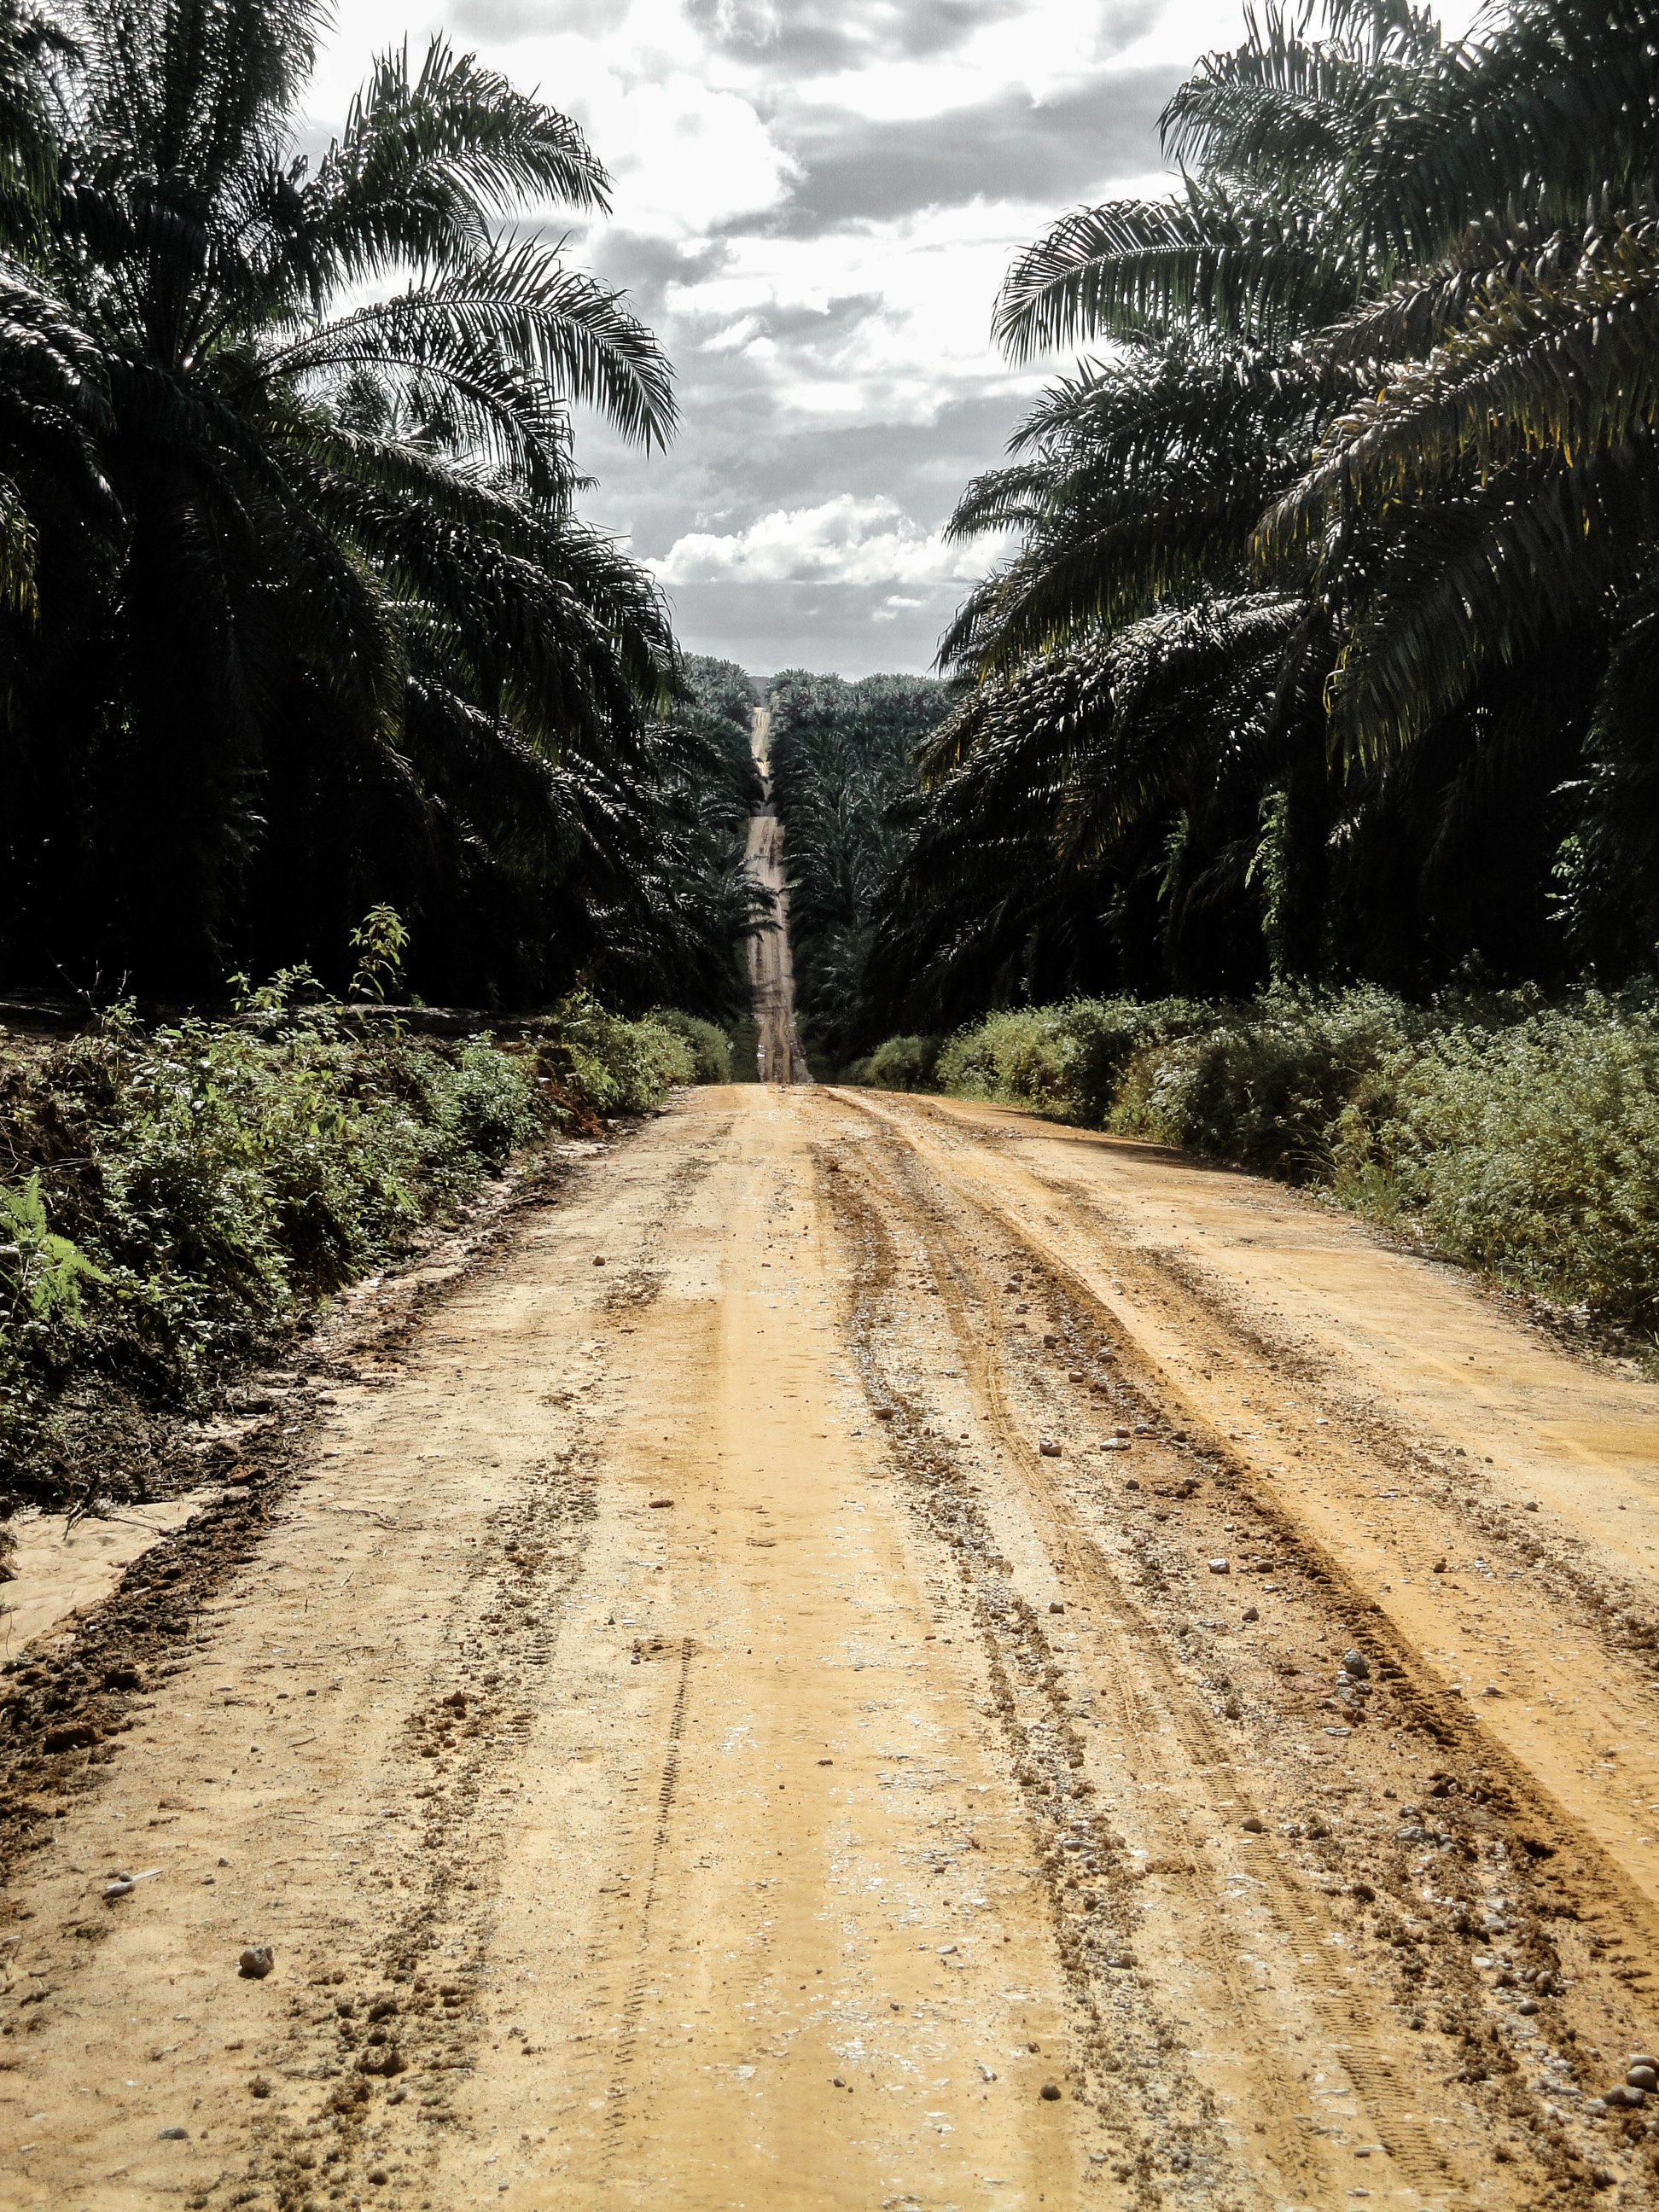 Rediscovering the palm oil business in East Kalimantan